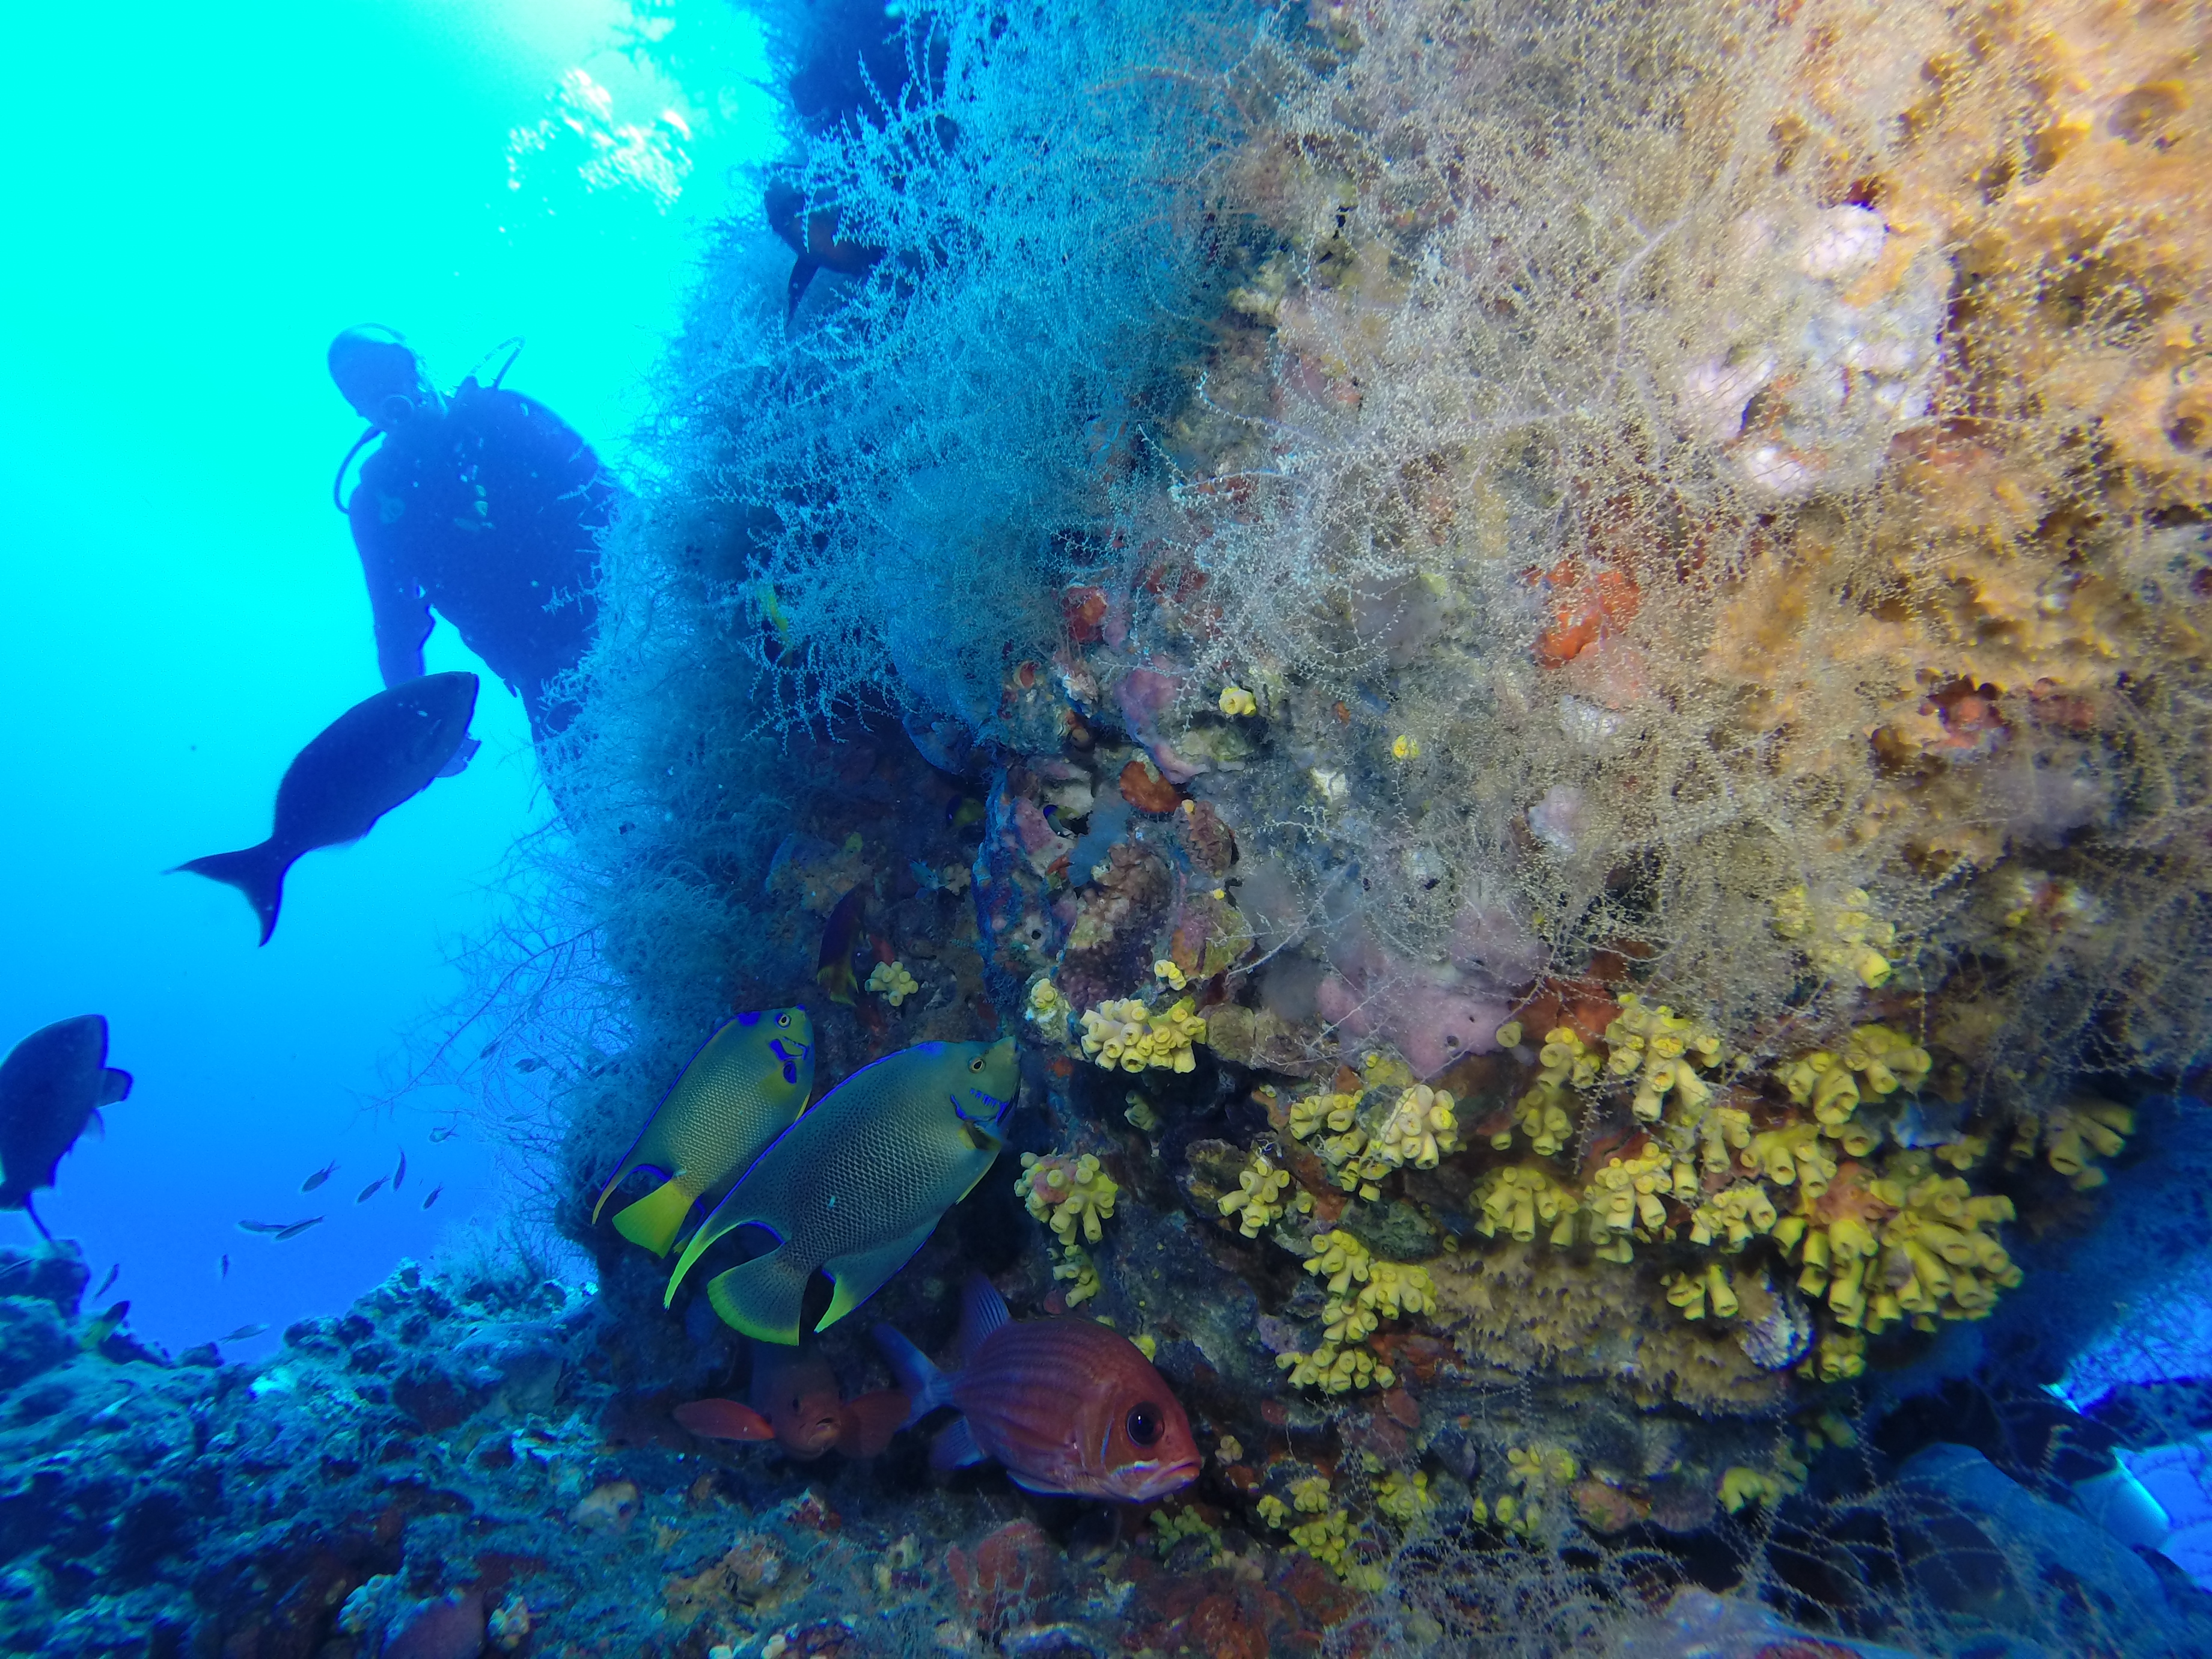 Underwater reef formed on an oil platform. Several fish and a diver are visible.